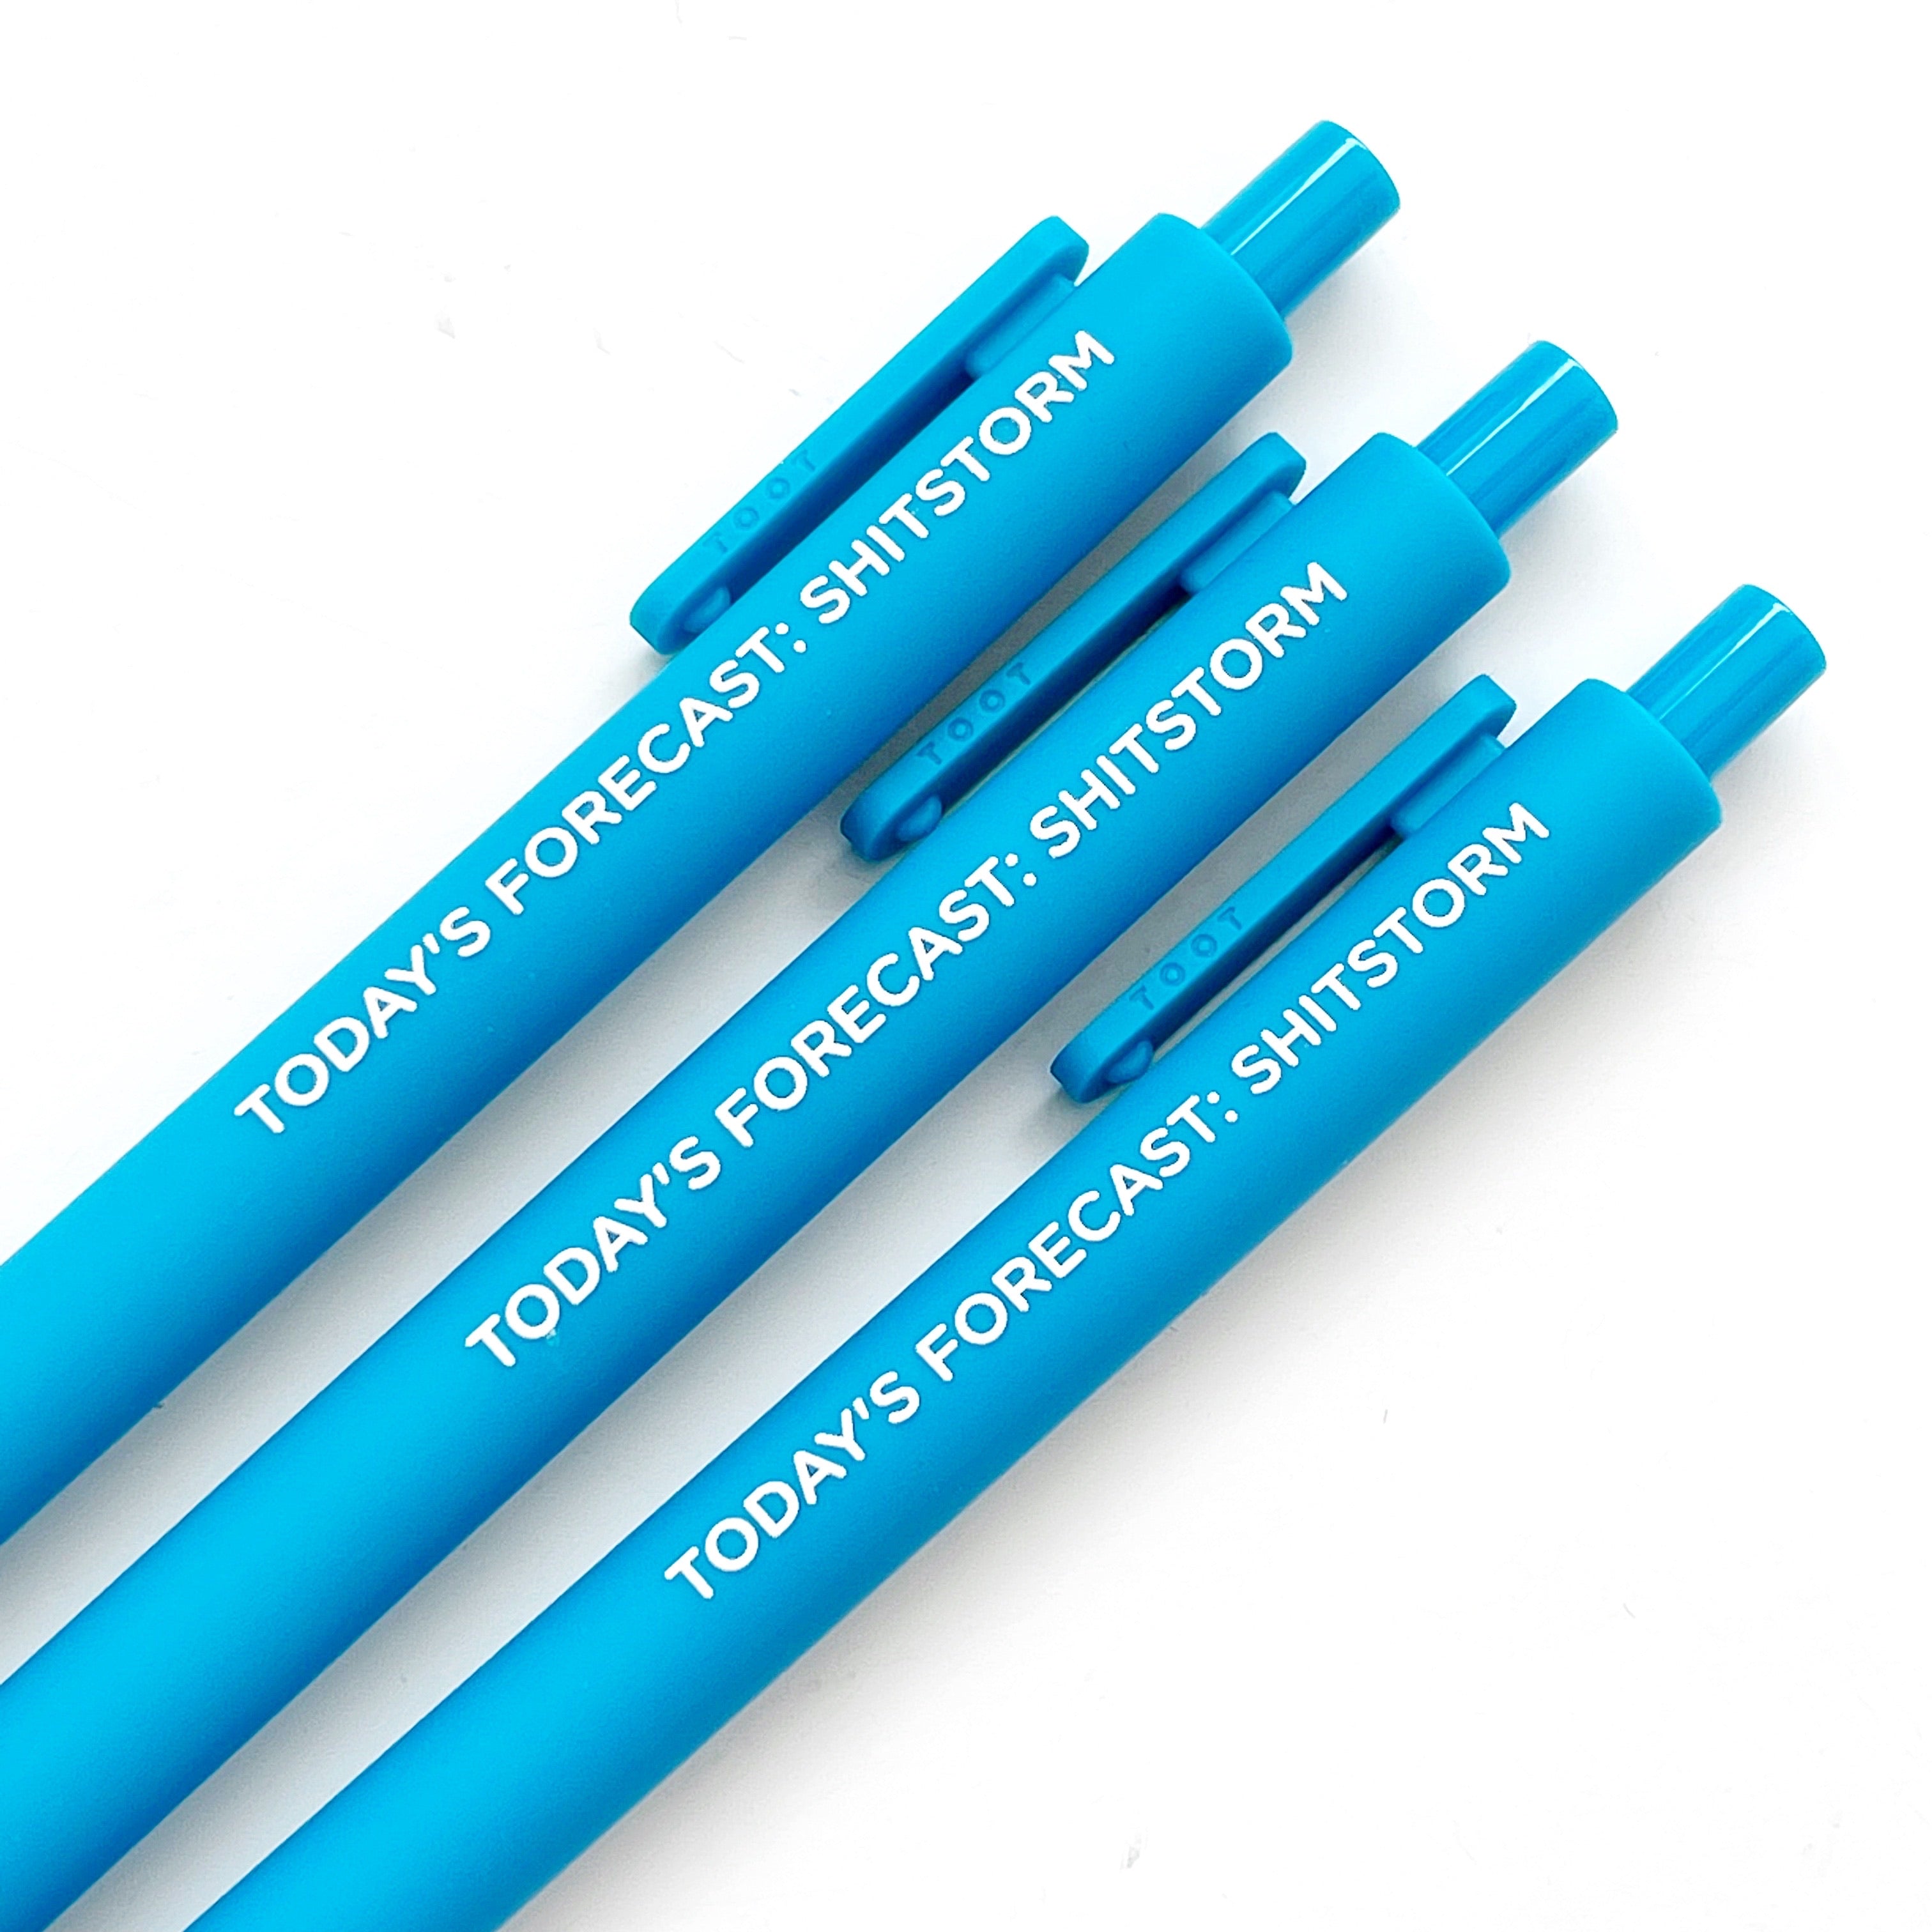 Image of blue pen with white text says, " Today's forecast: Shitstorm".